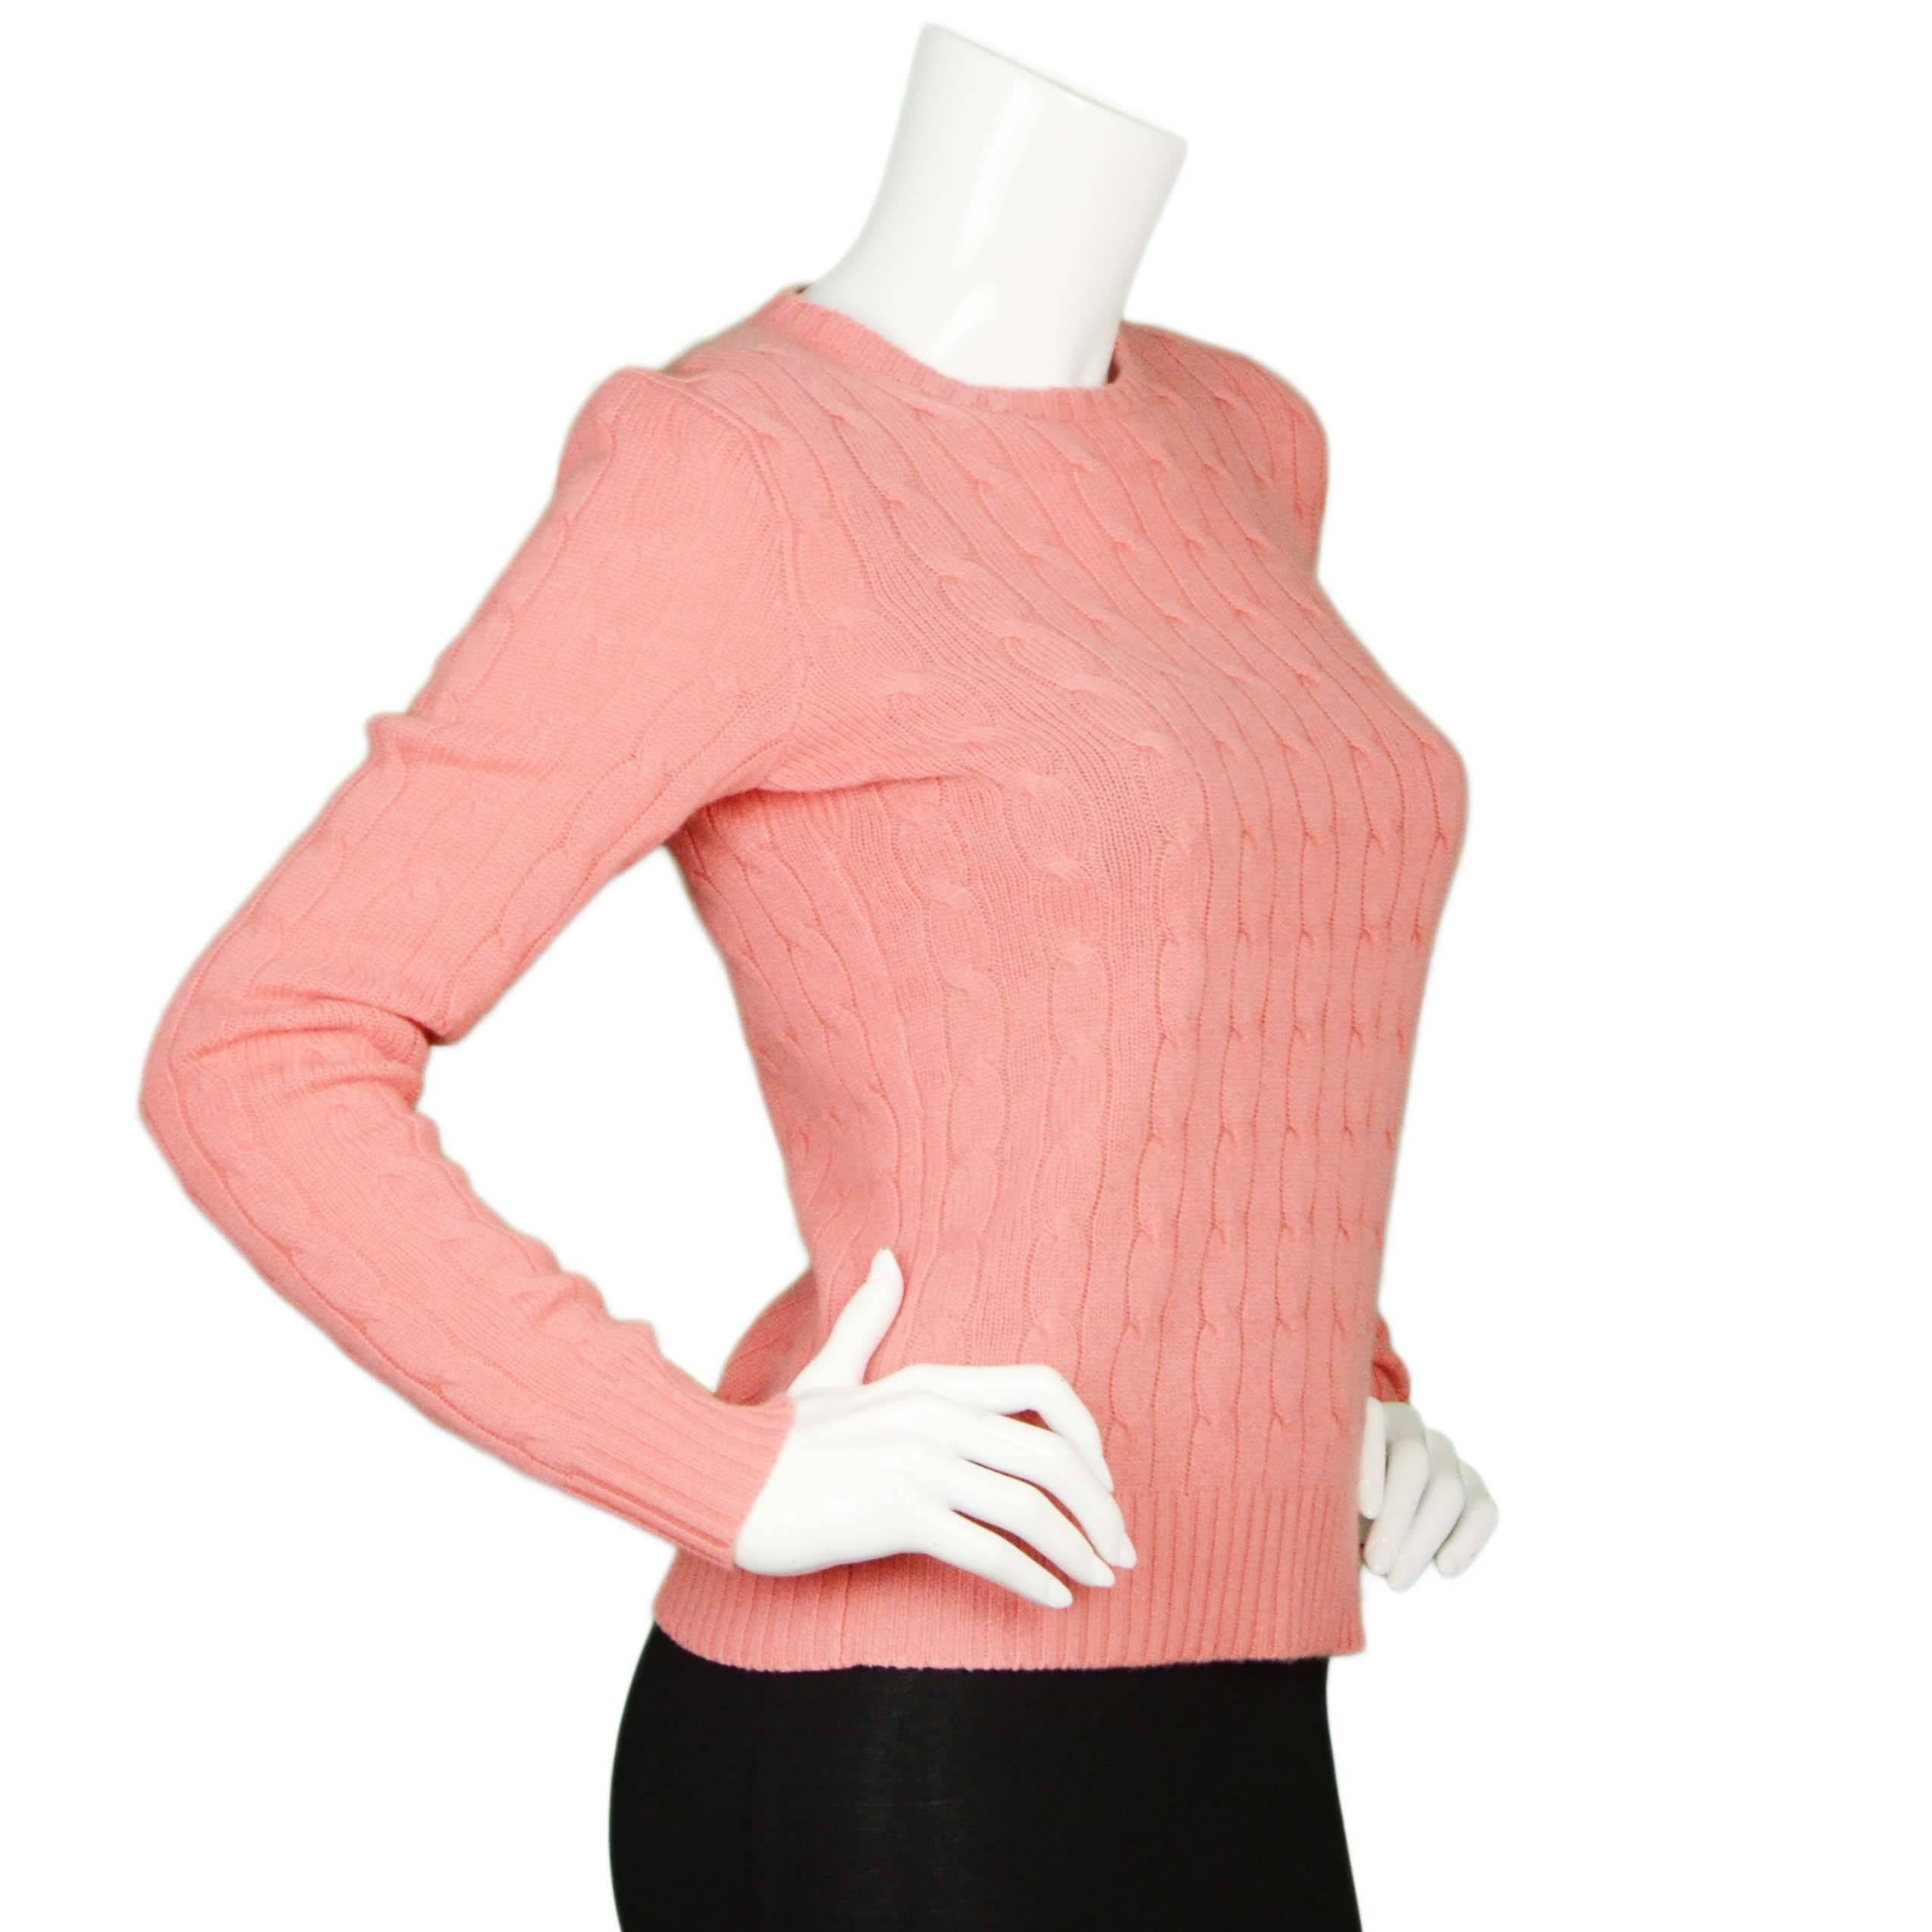 Ralph Lauren Salmon Cable Knit Cashmere Sweater 
Features crew neckline
Made In: China
Color: Salmon
Composition: 100% Cashmere
Lining: None
Closure/Opening: Pull over
Exterior Pockets: None
Interior Pockets: None
Overall Condition: